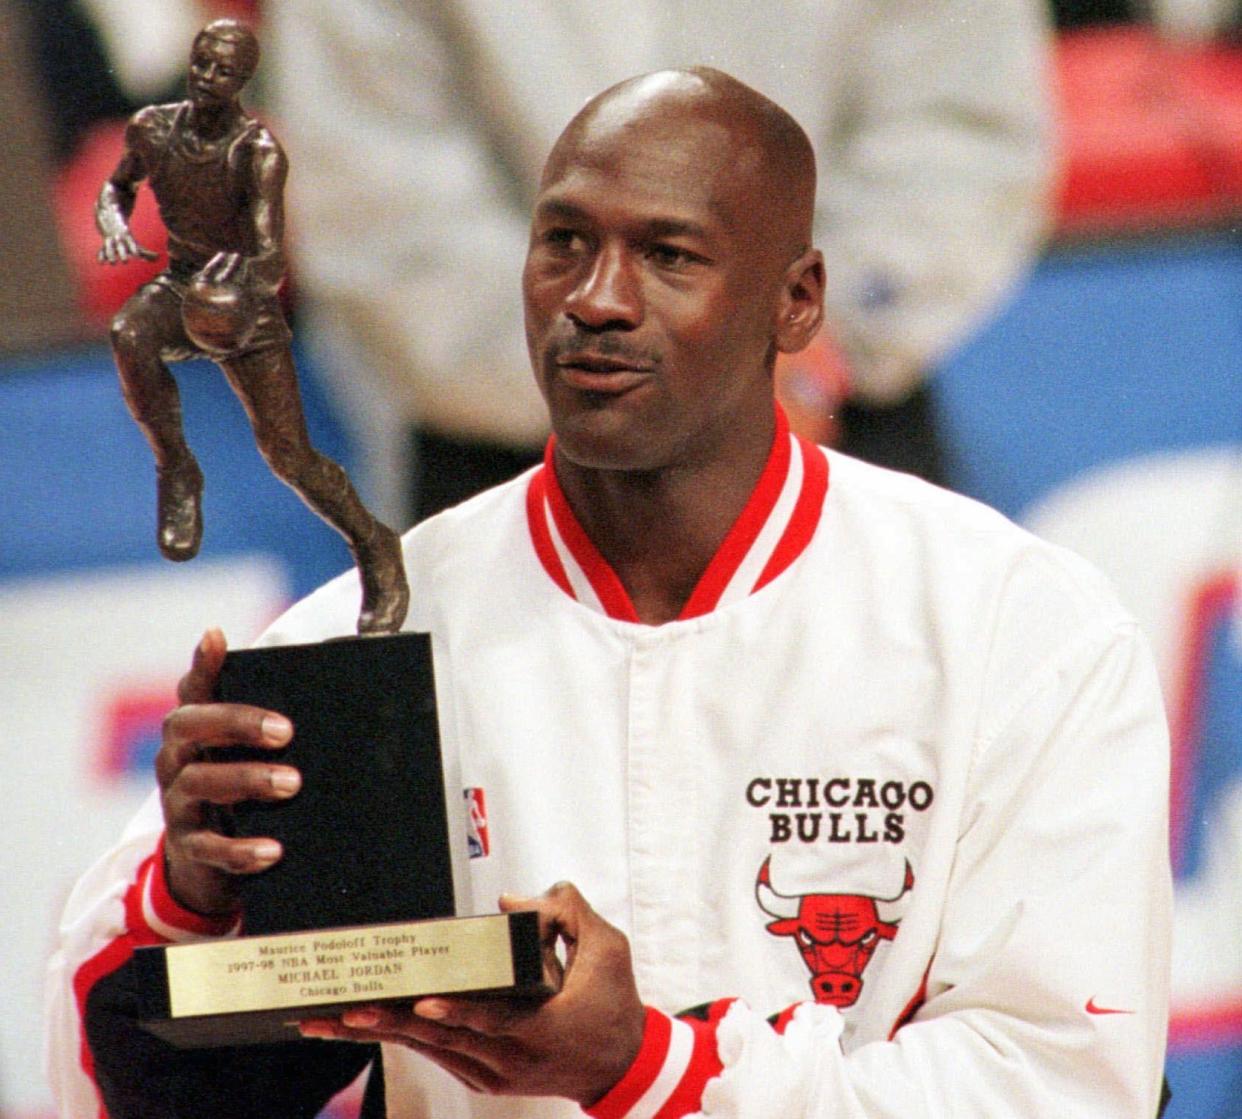 Chicago Bulls' Michael Jordan looks at the MVP award presented to him before the Bulls-Indiana Pacers playoff game Tuesday, May 19, 1998  in Chicago. (AP Photo/Frank Polich)